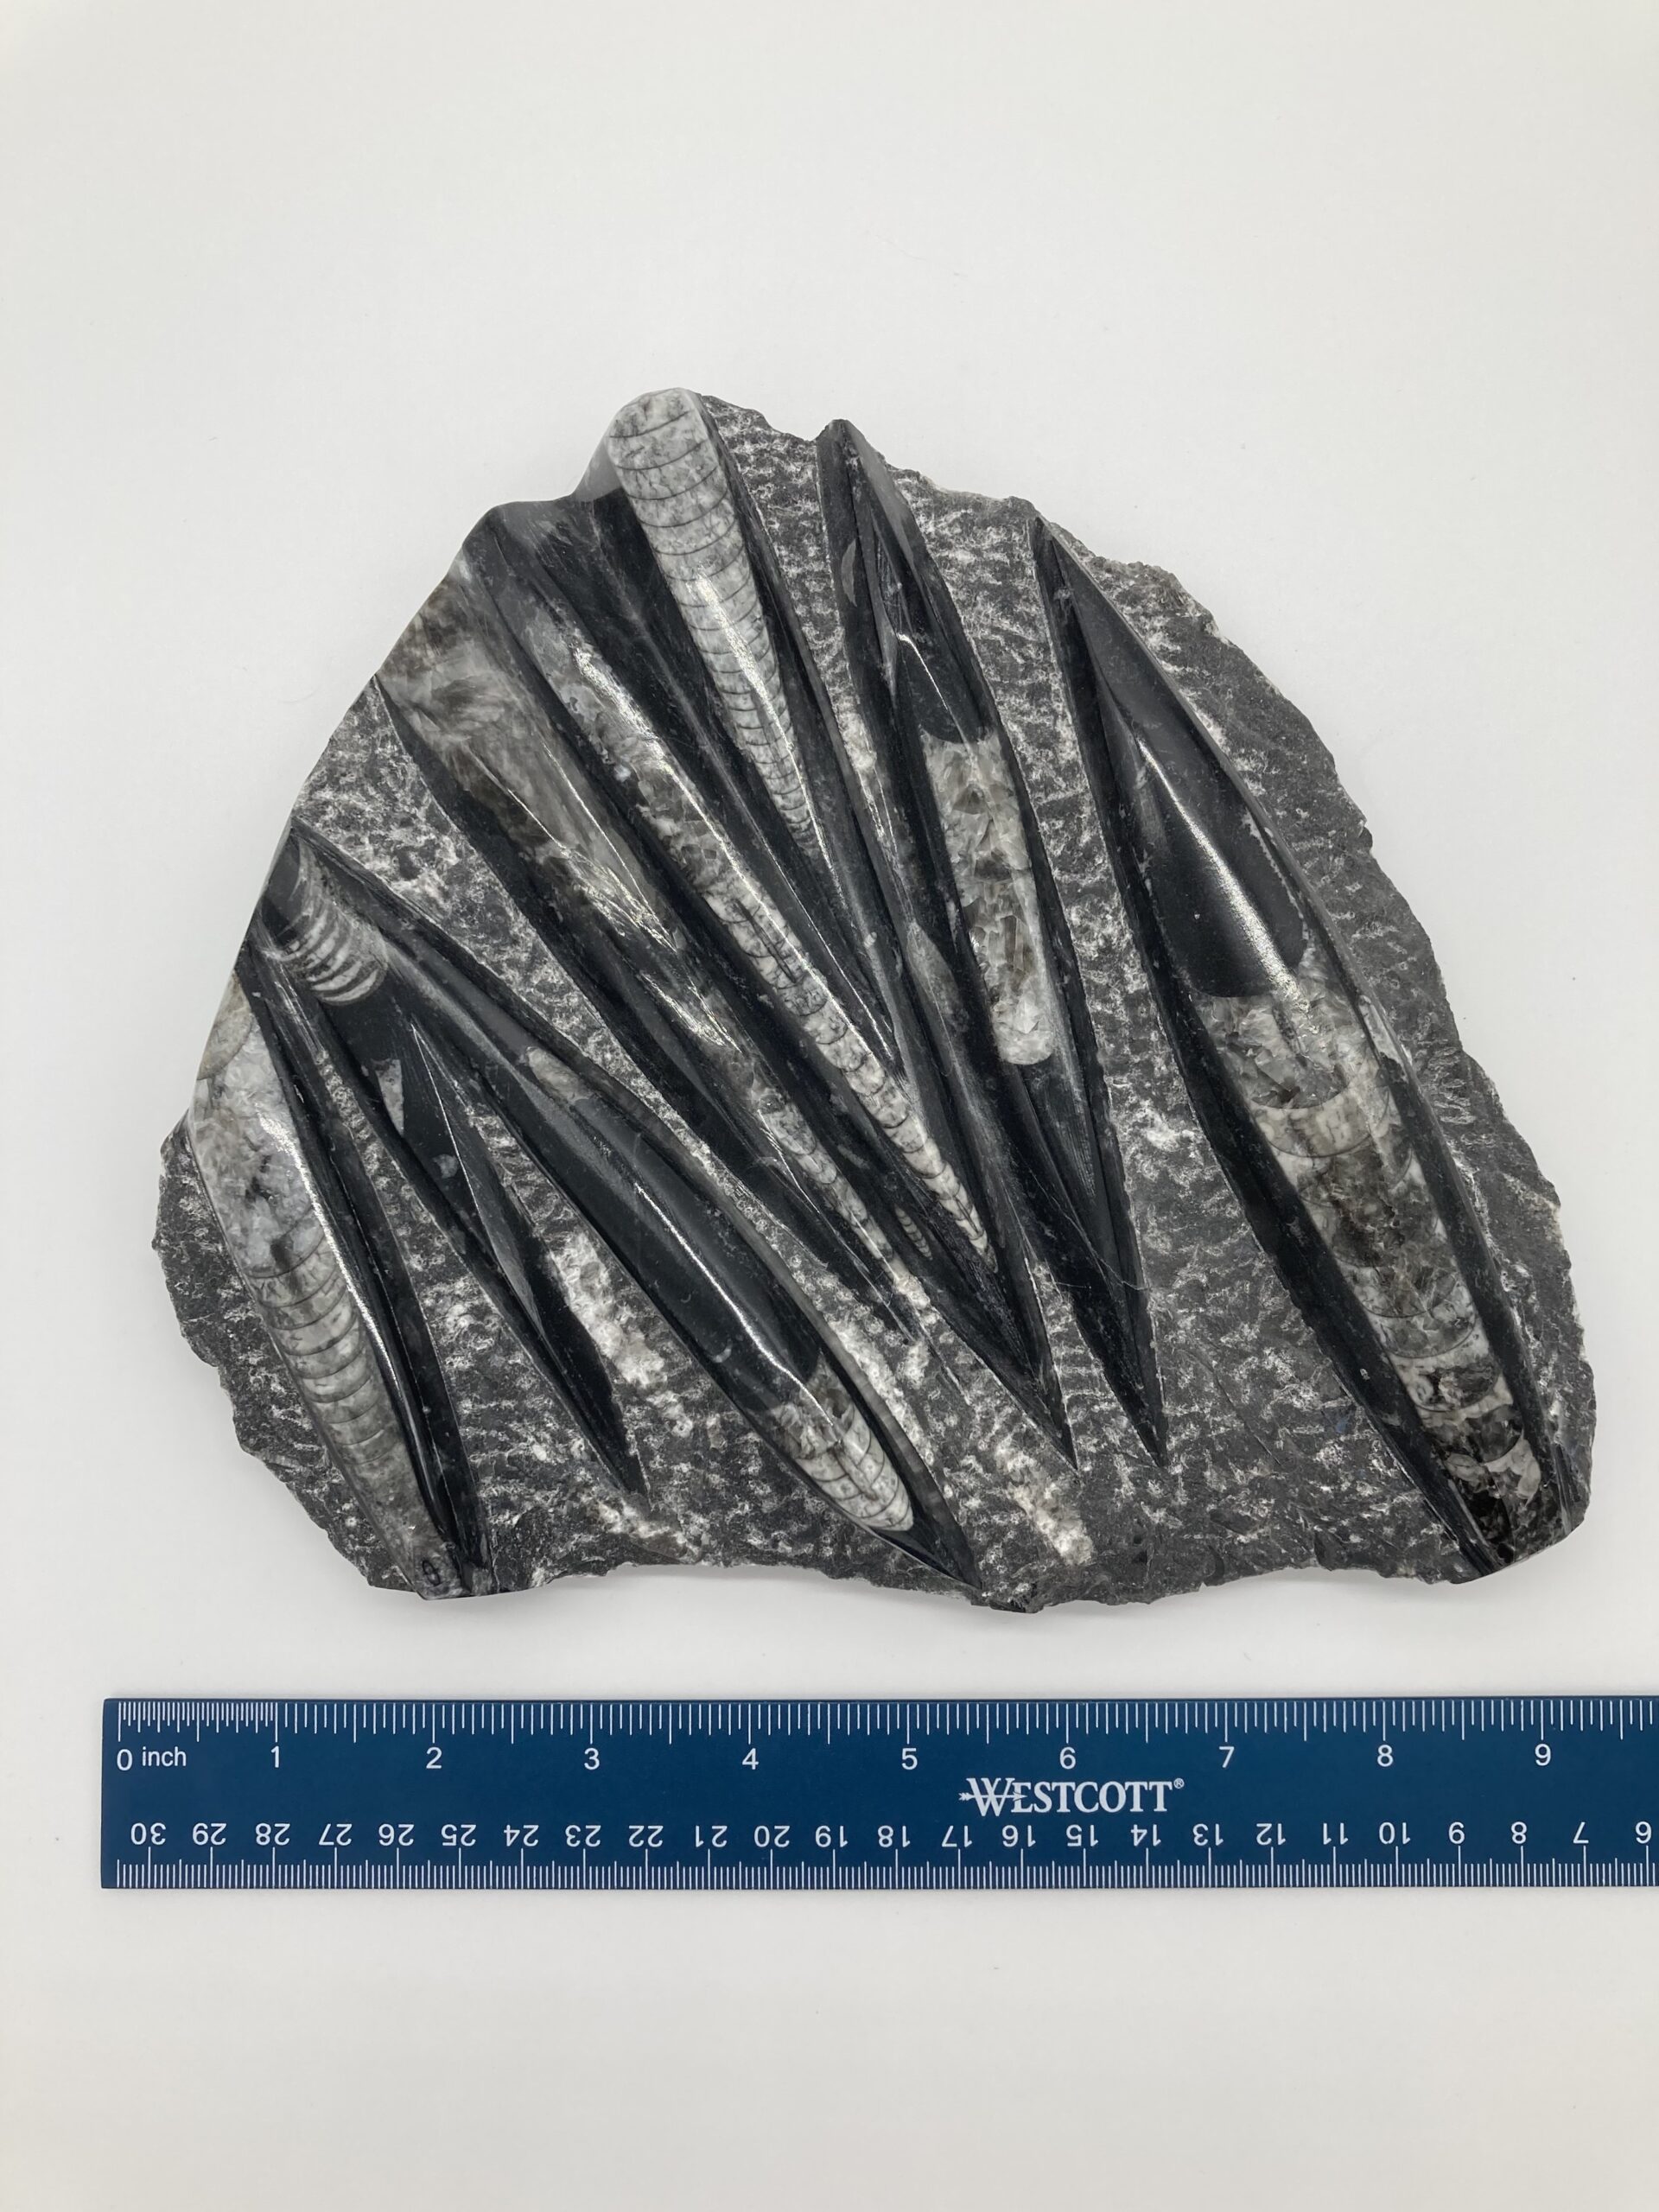 Orthoceras fossil rock front